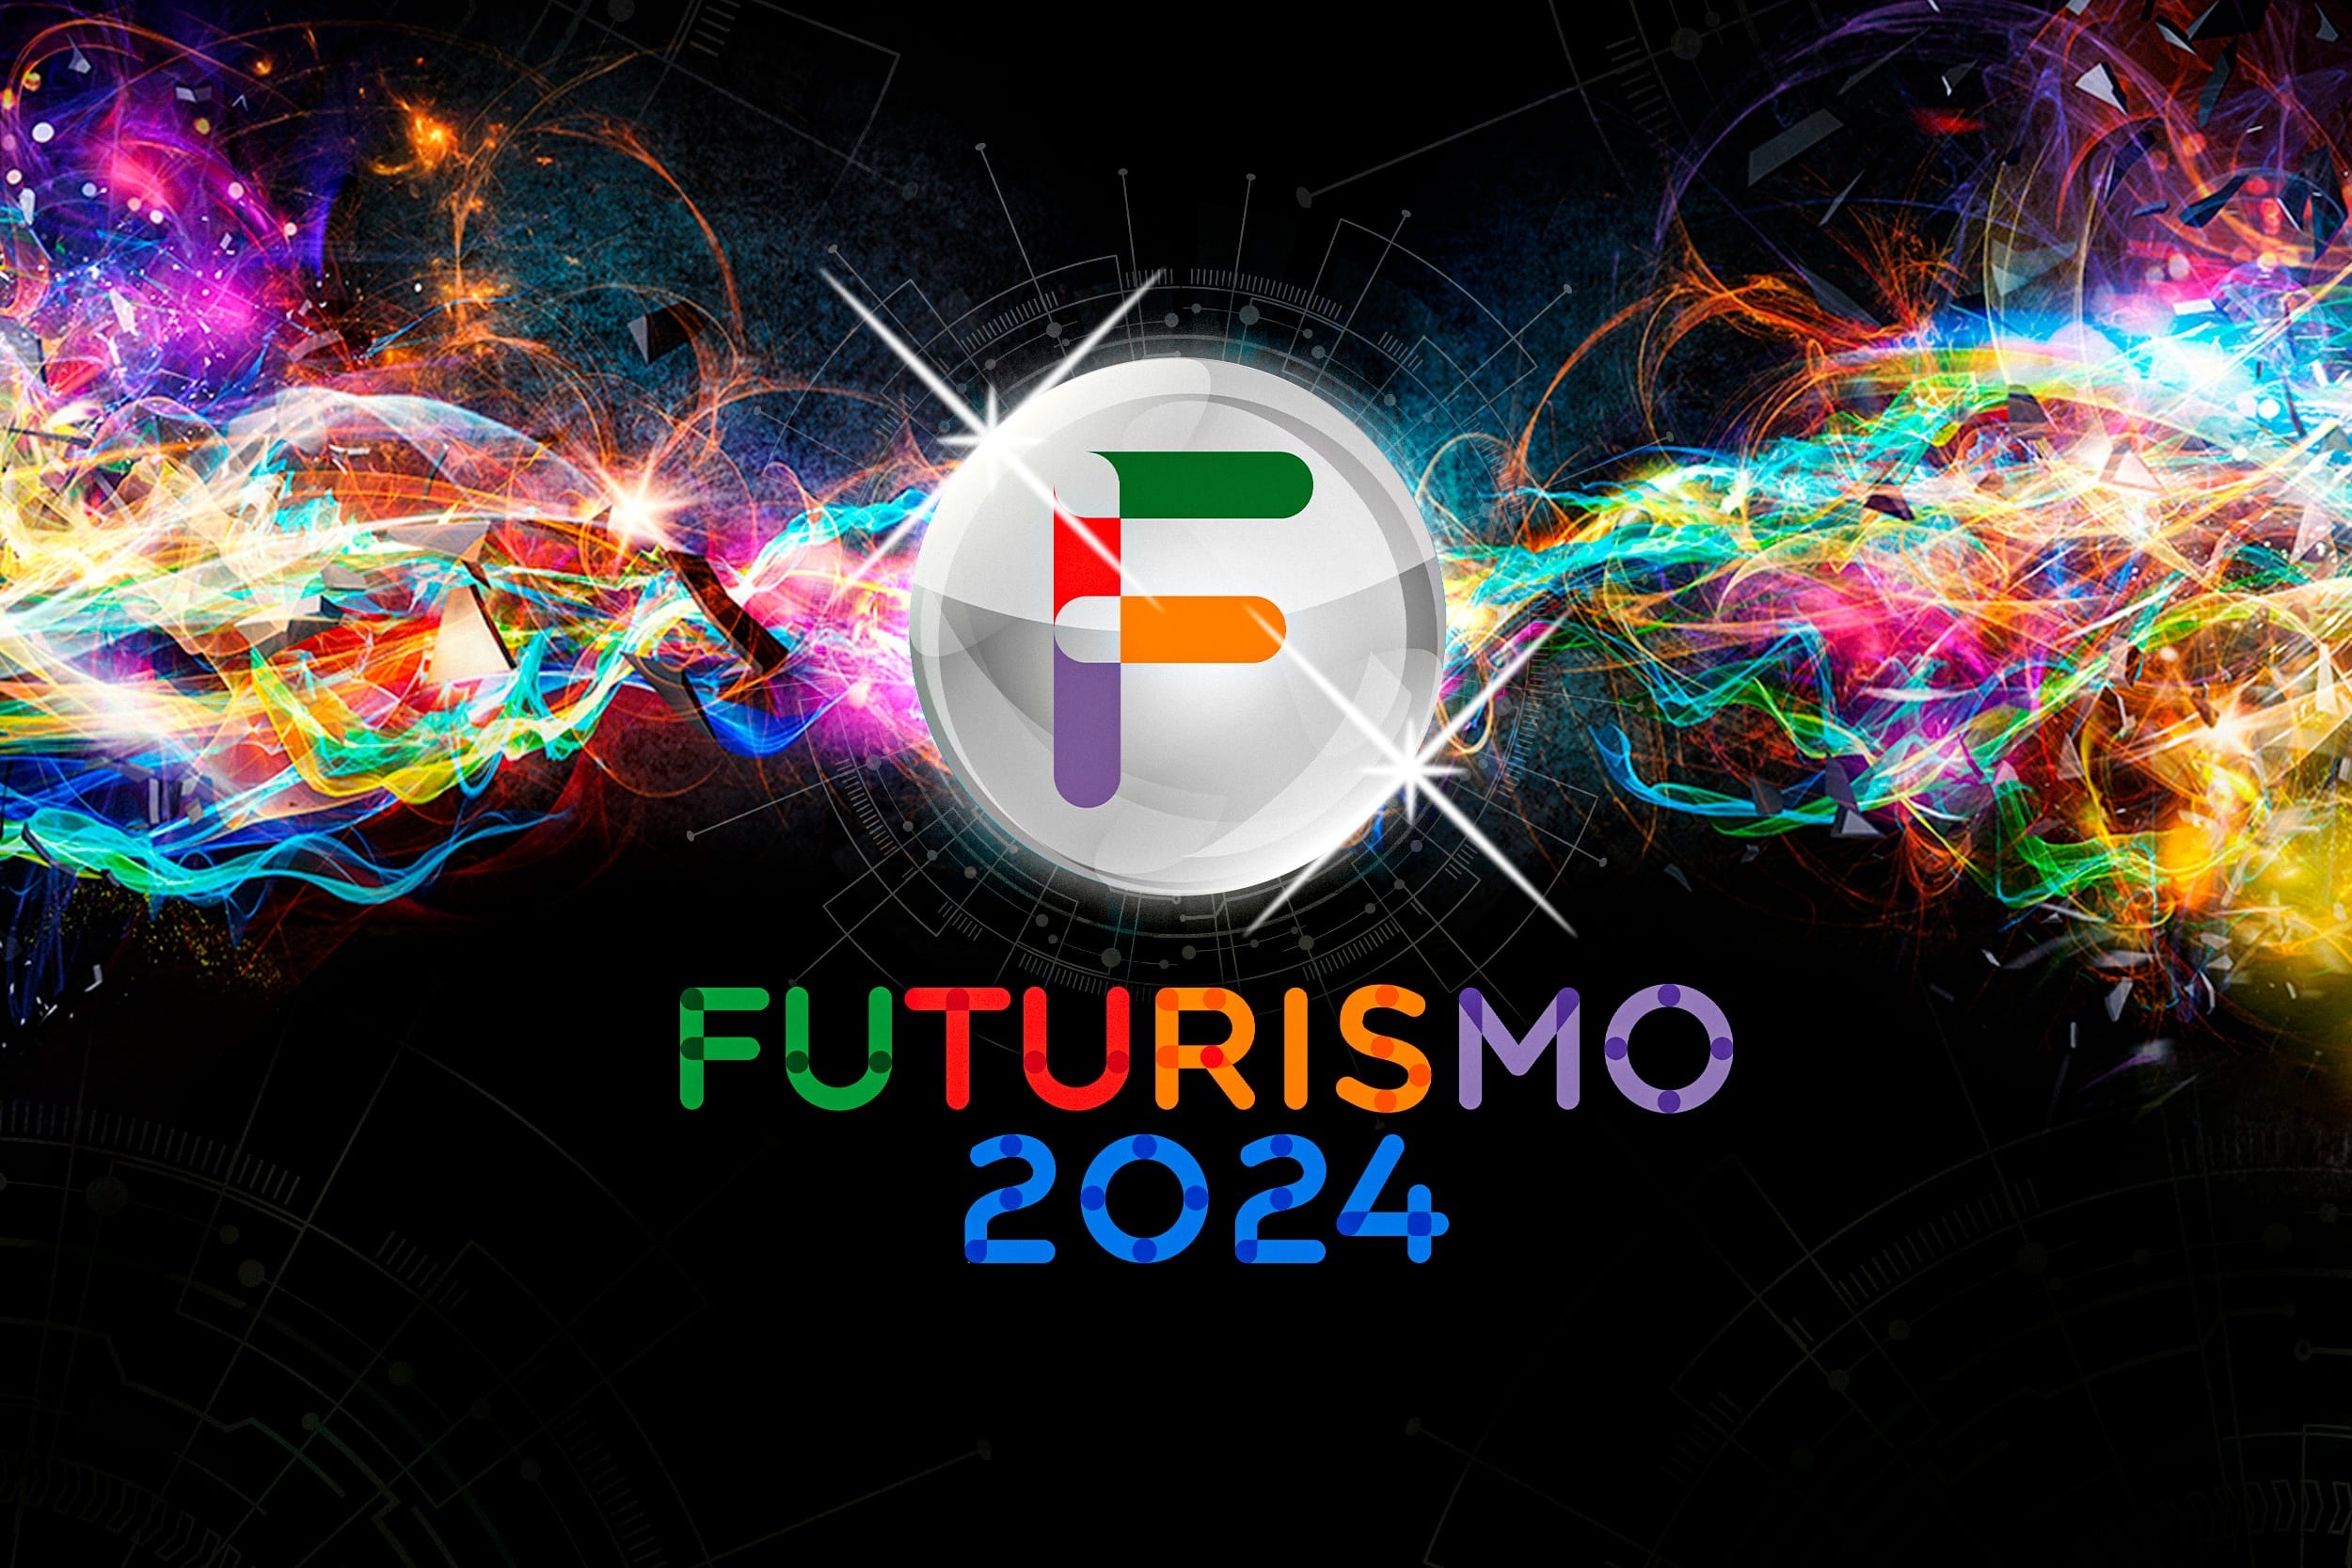 futurismo 2024 is displayed on a colorful background